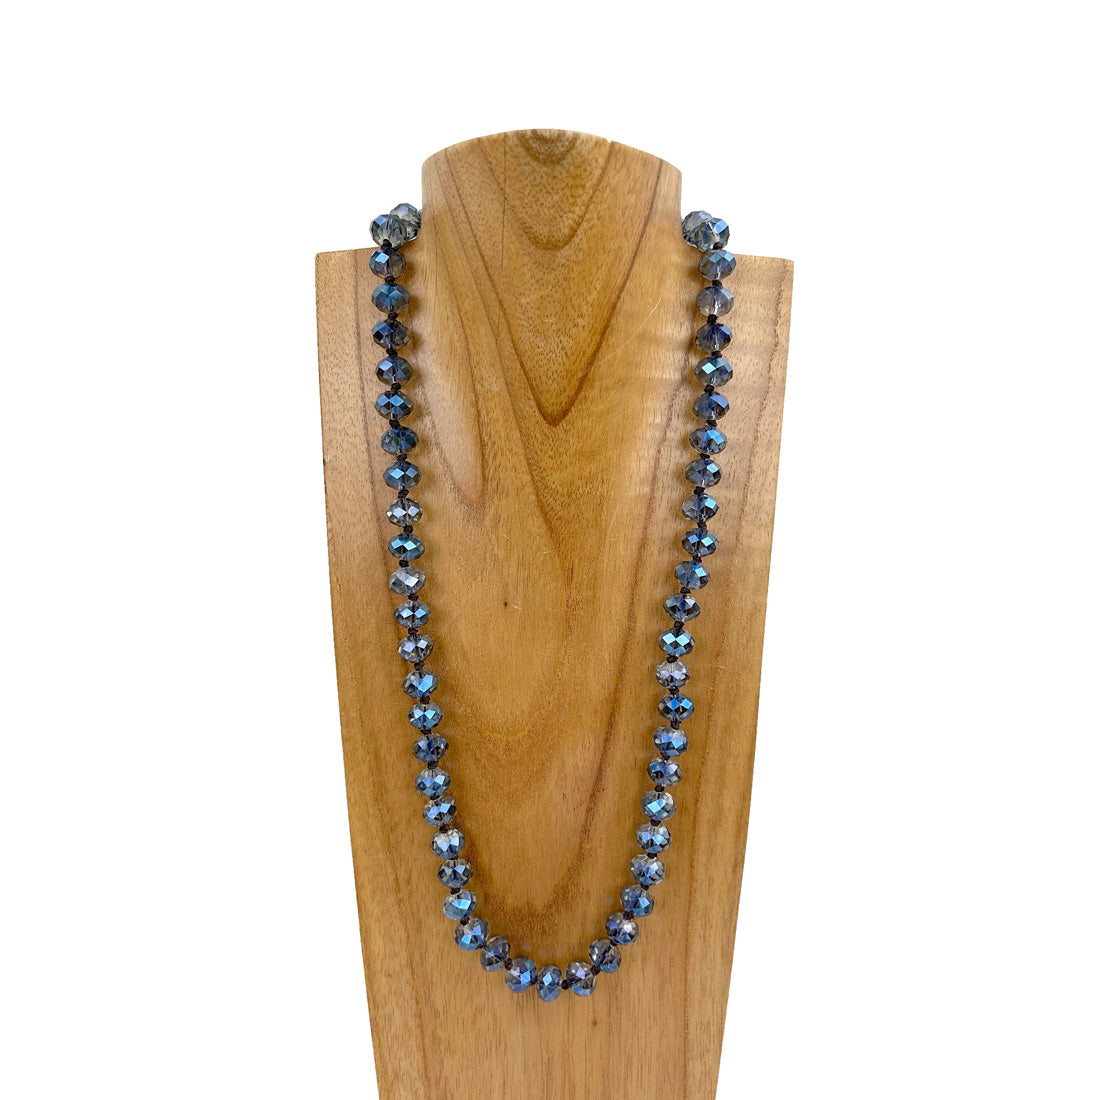 NKS230818-01-BLUE      24 inches hot blue crystal Necklace